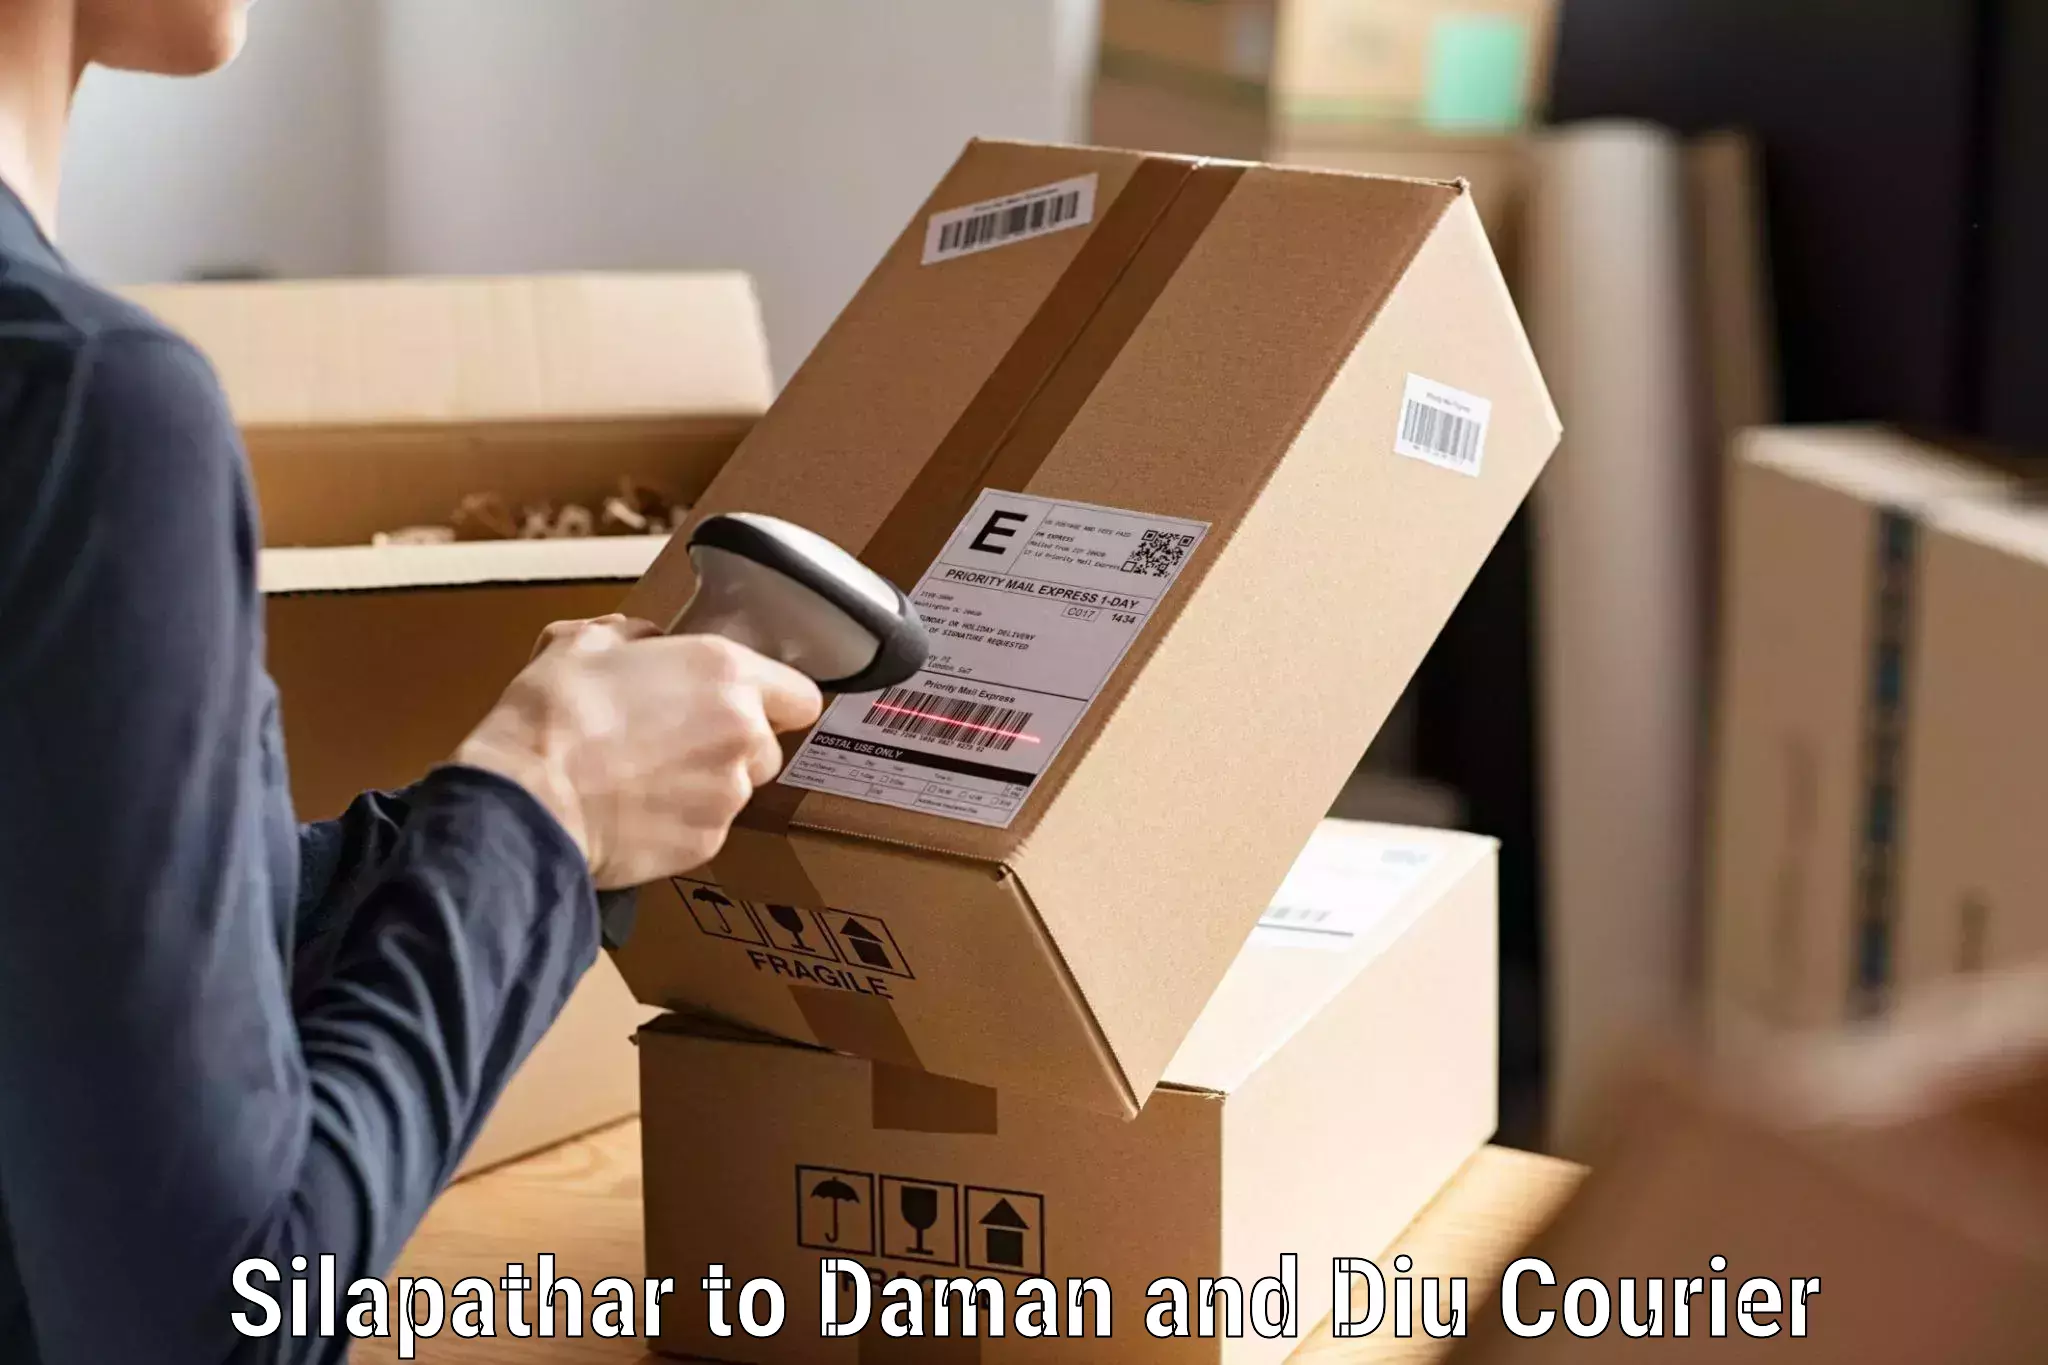 Courier service booking Silapathar to Diu